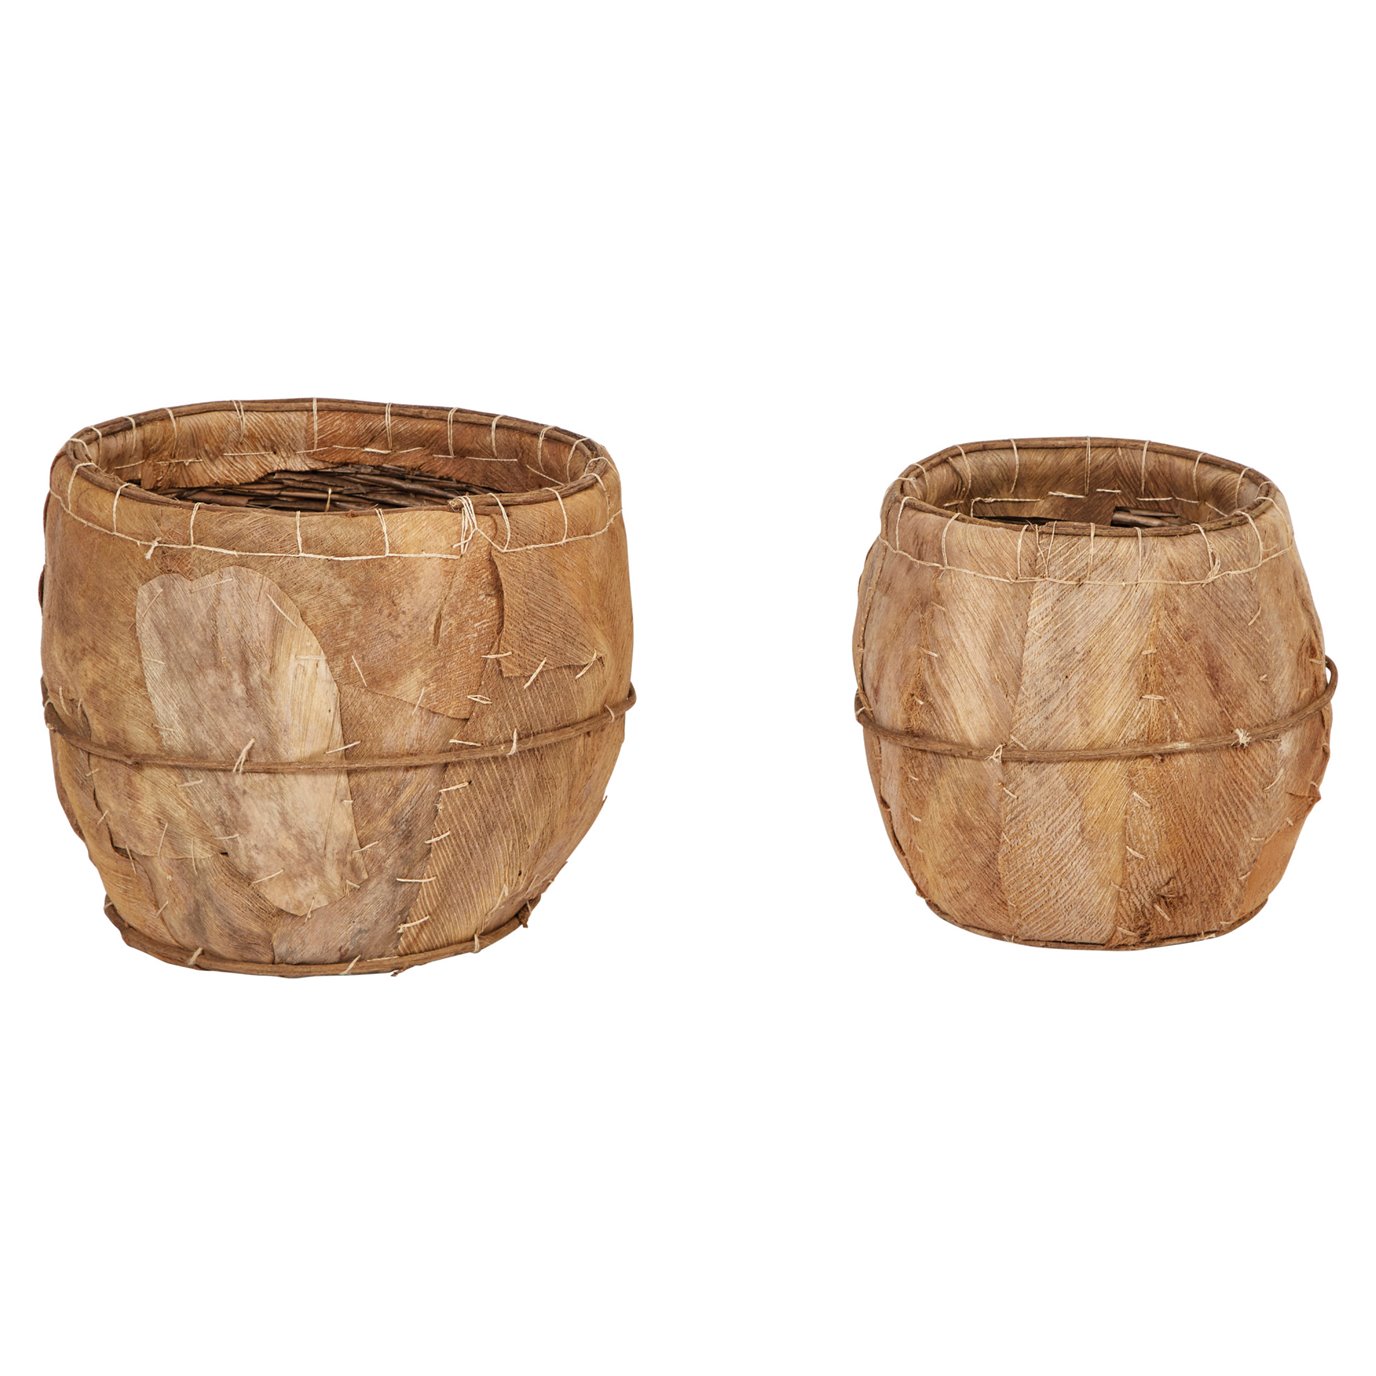 Handmade Coca Leaf Planters with Plastic Lining (Set of 2 Sizes/Hold 17" & 20" Pots) Each one will vary